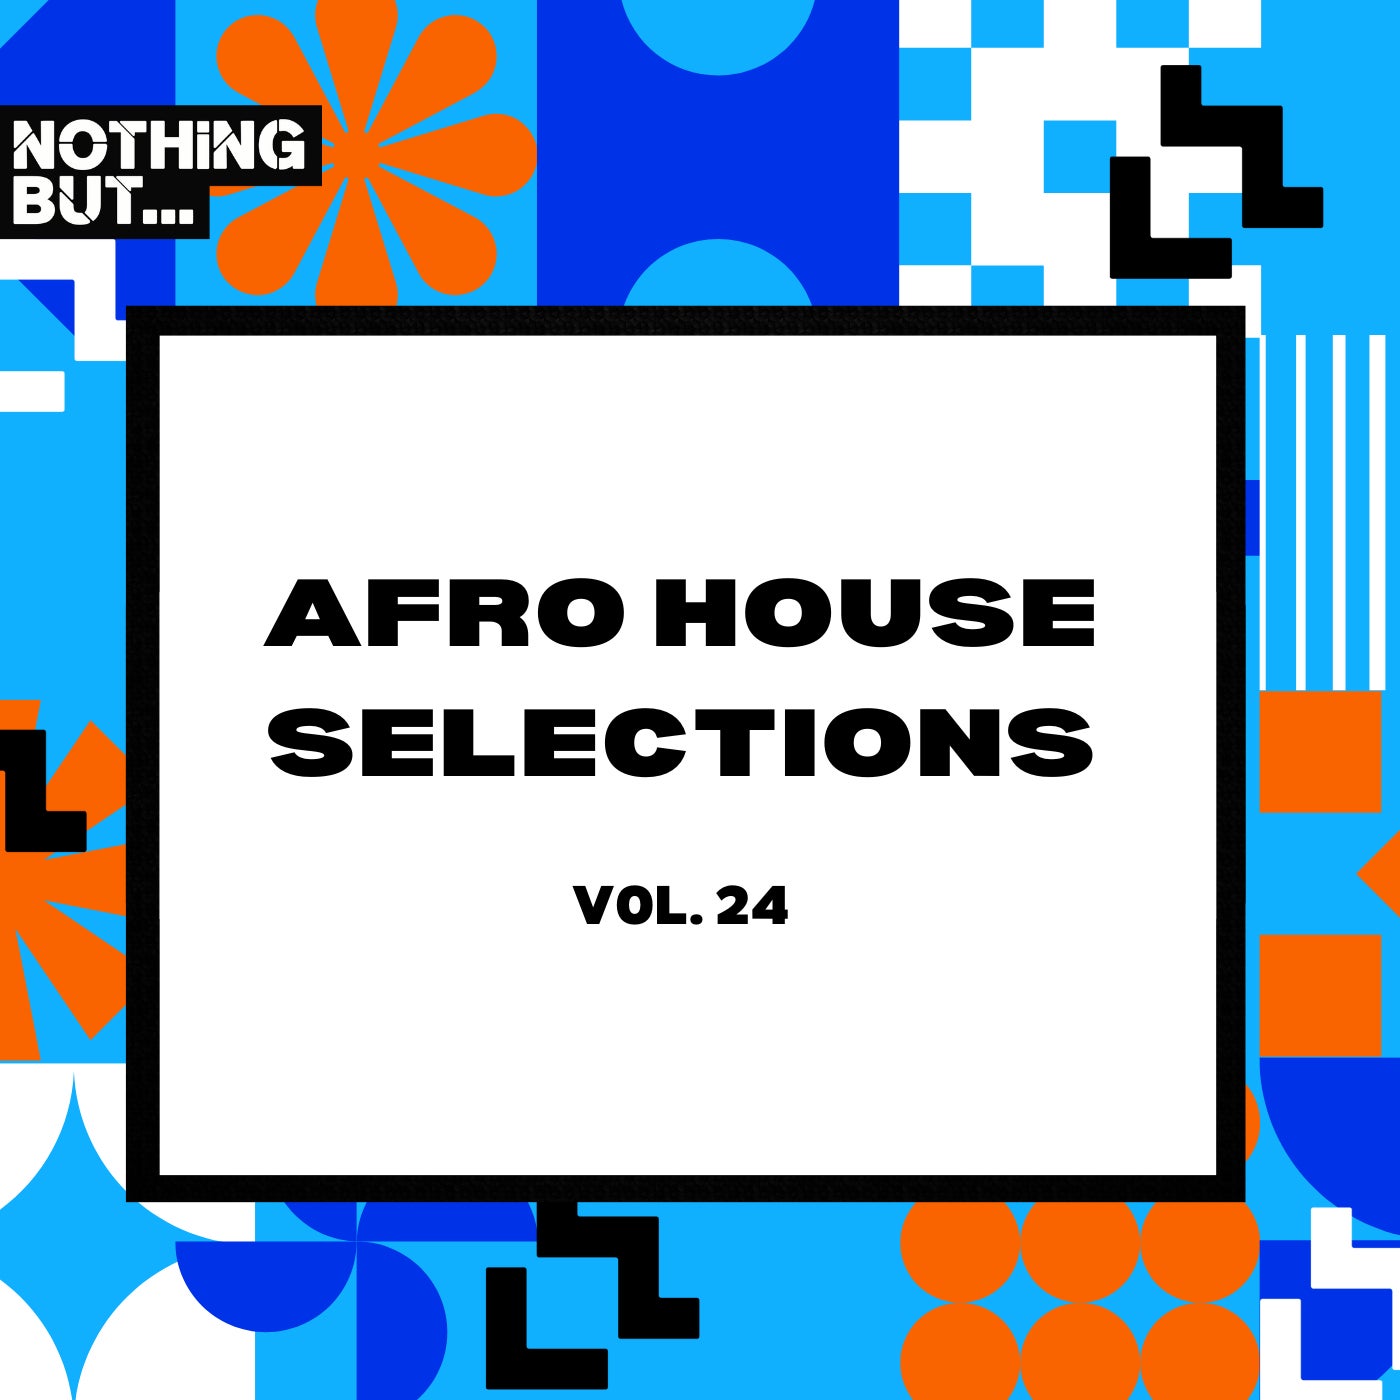 Nothing But... Afro House Selections, Vol. 24